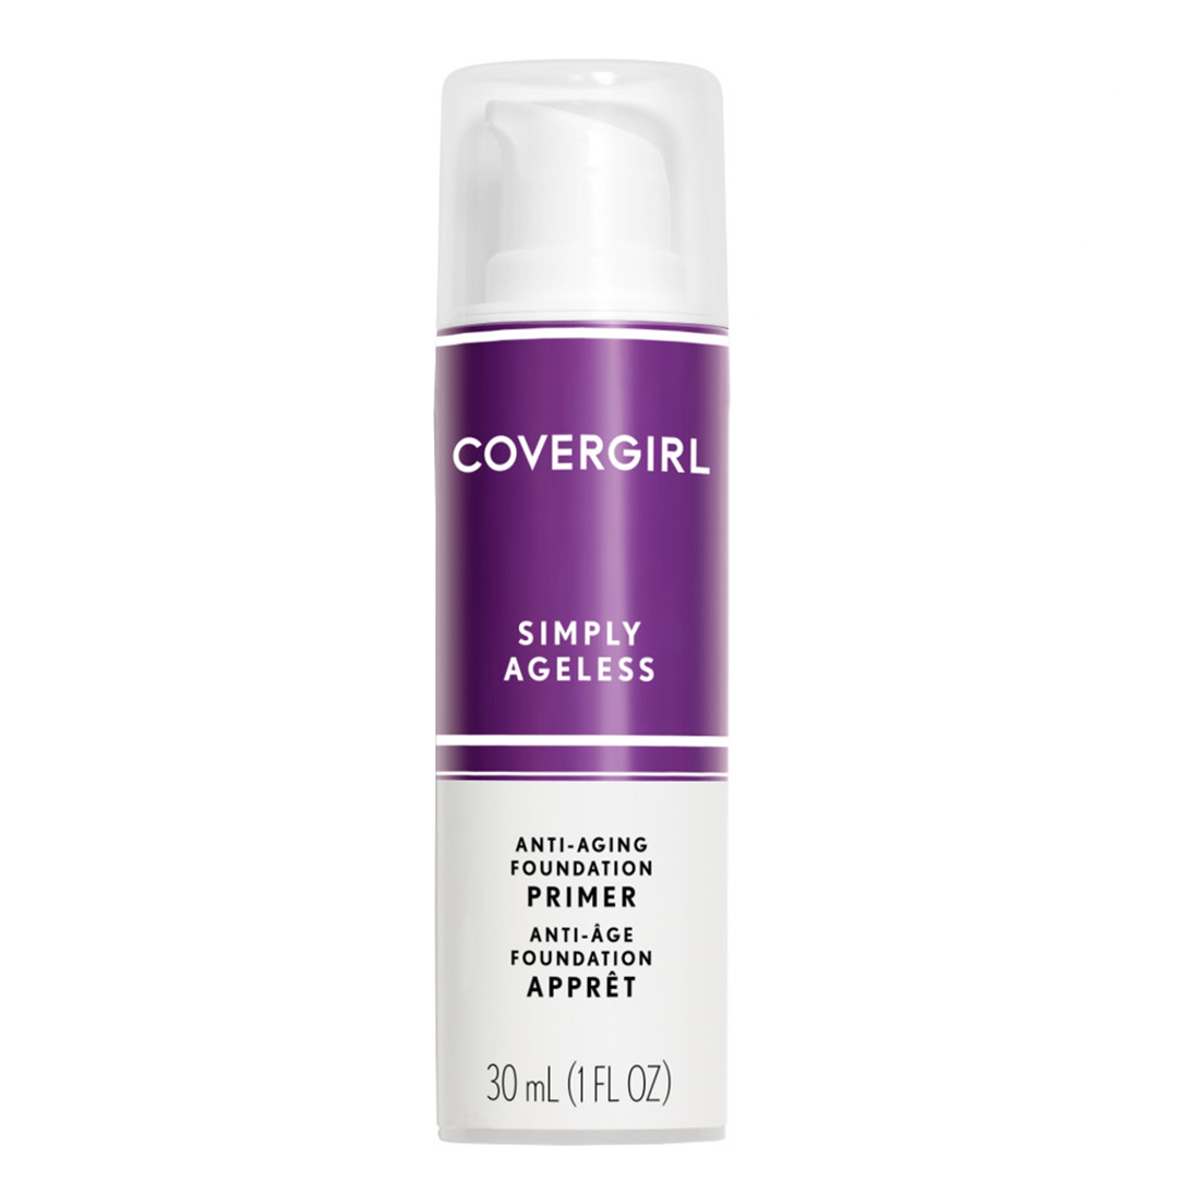 Covergirl Simply Ageless Makeup Primer